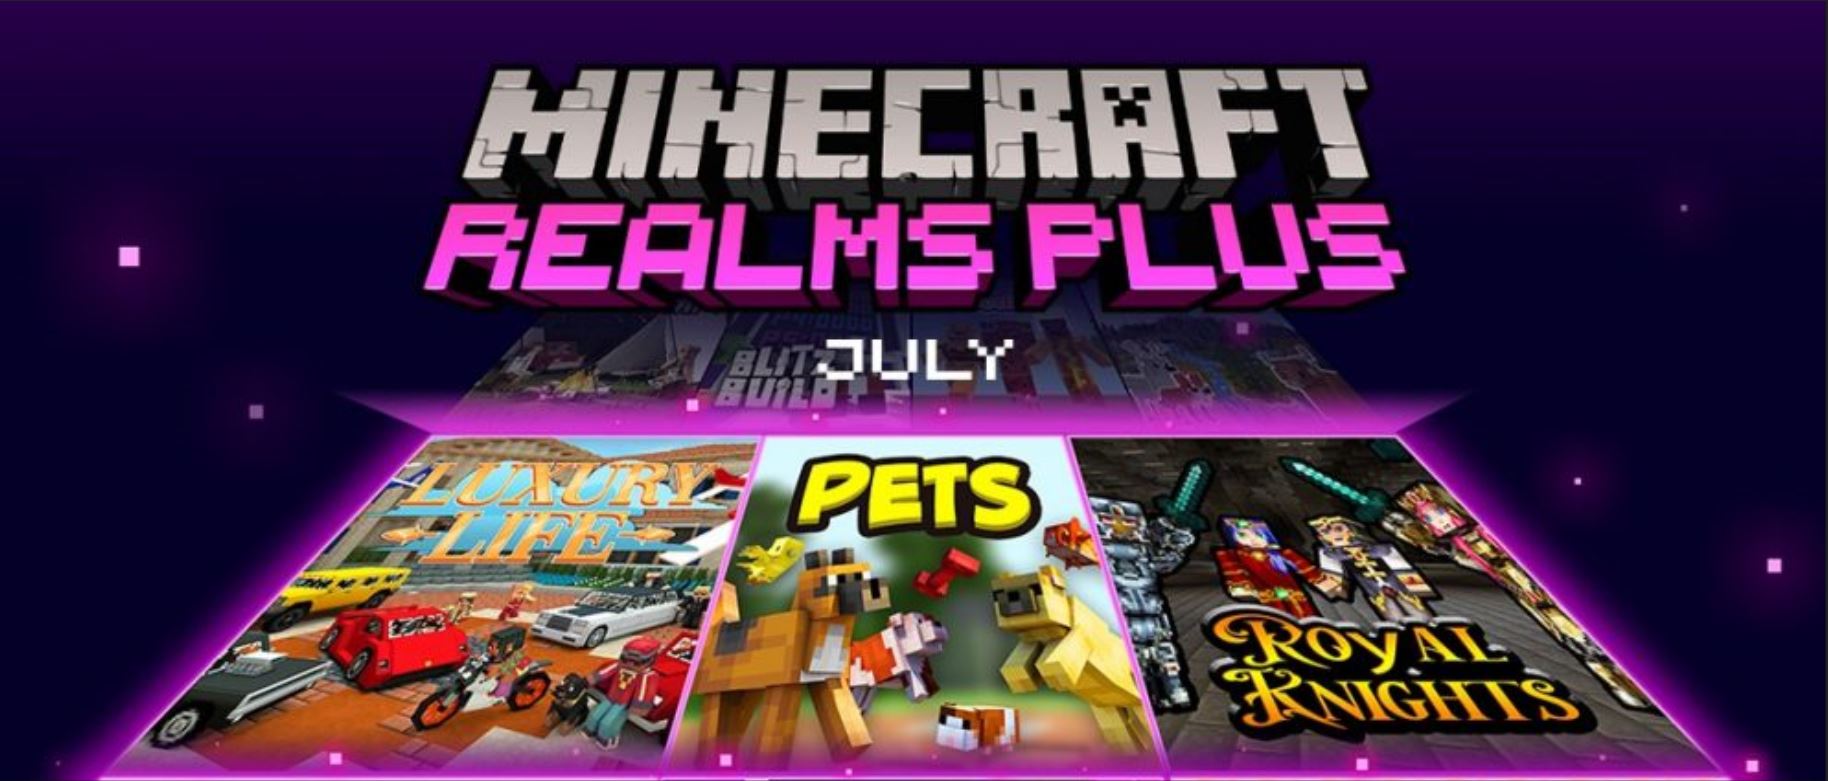 Minecraft Realms Plus July Update: Six New User-Created Creations Available For Users